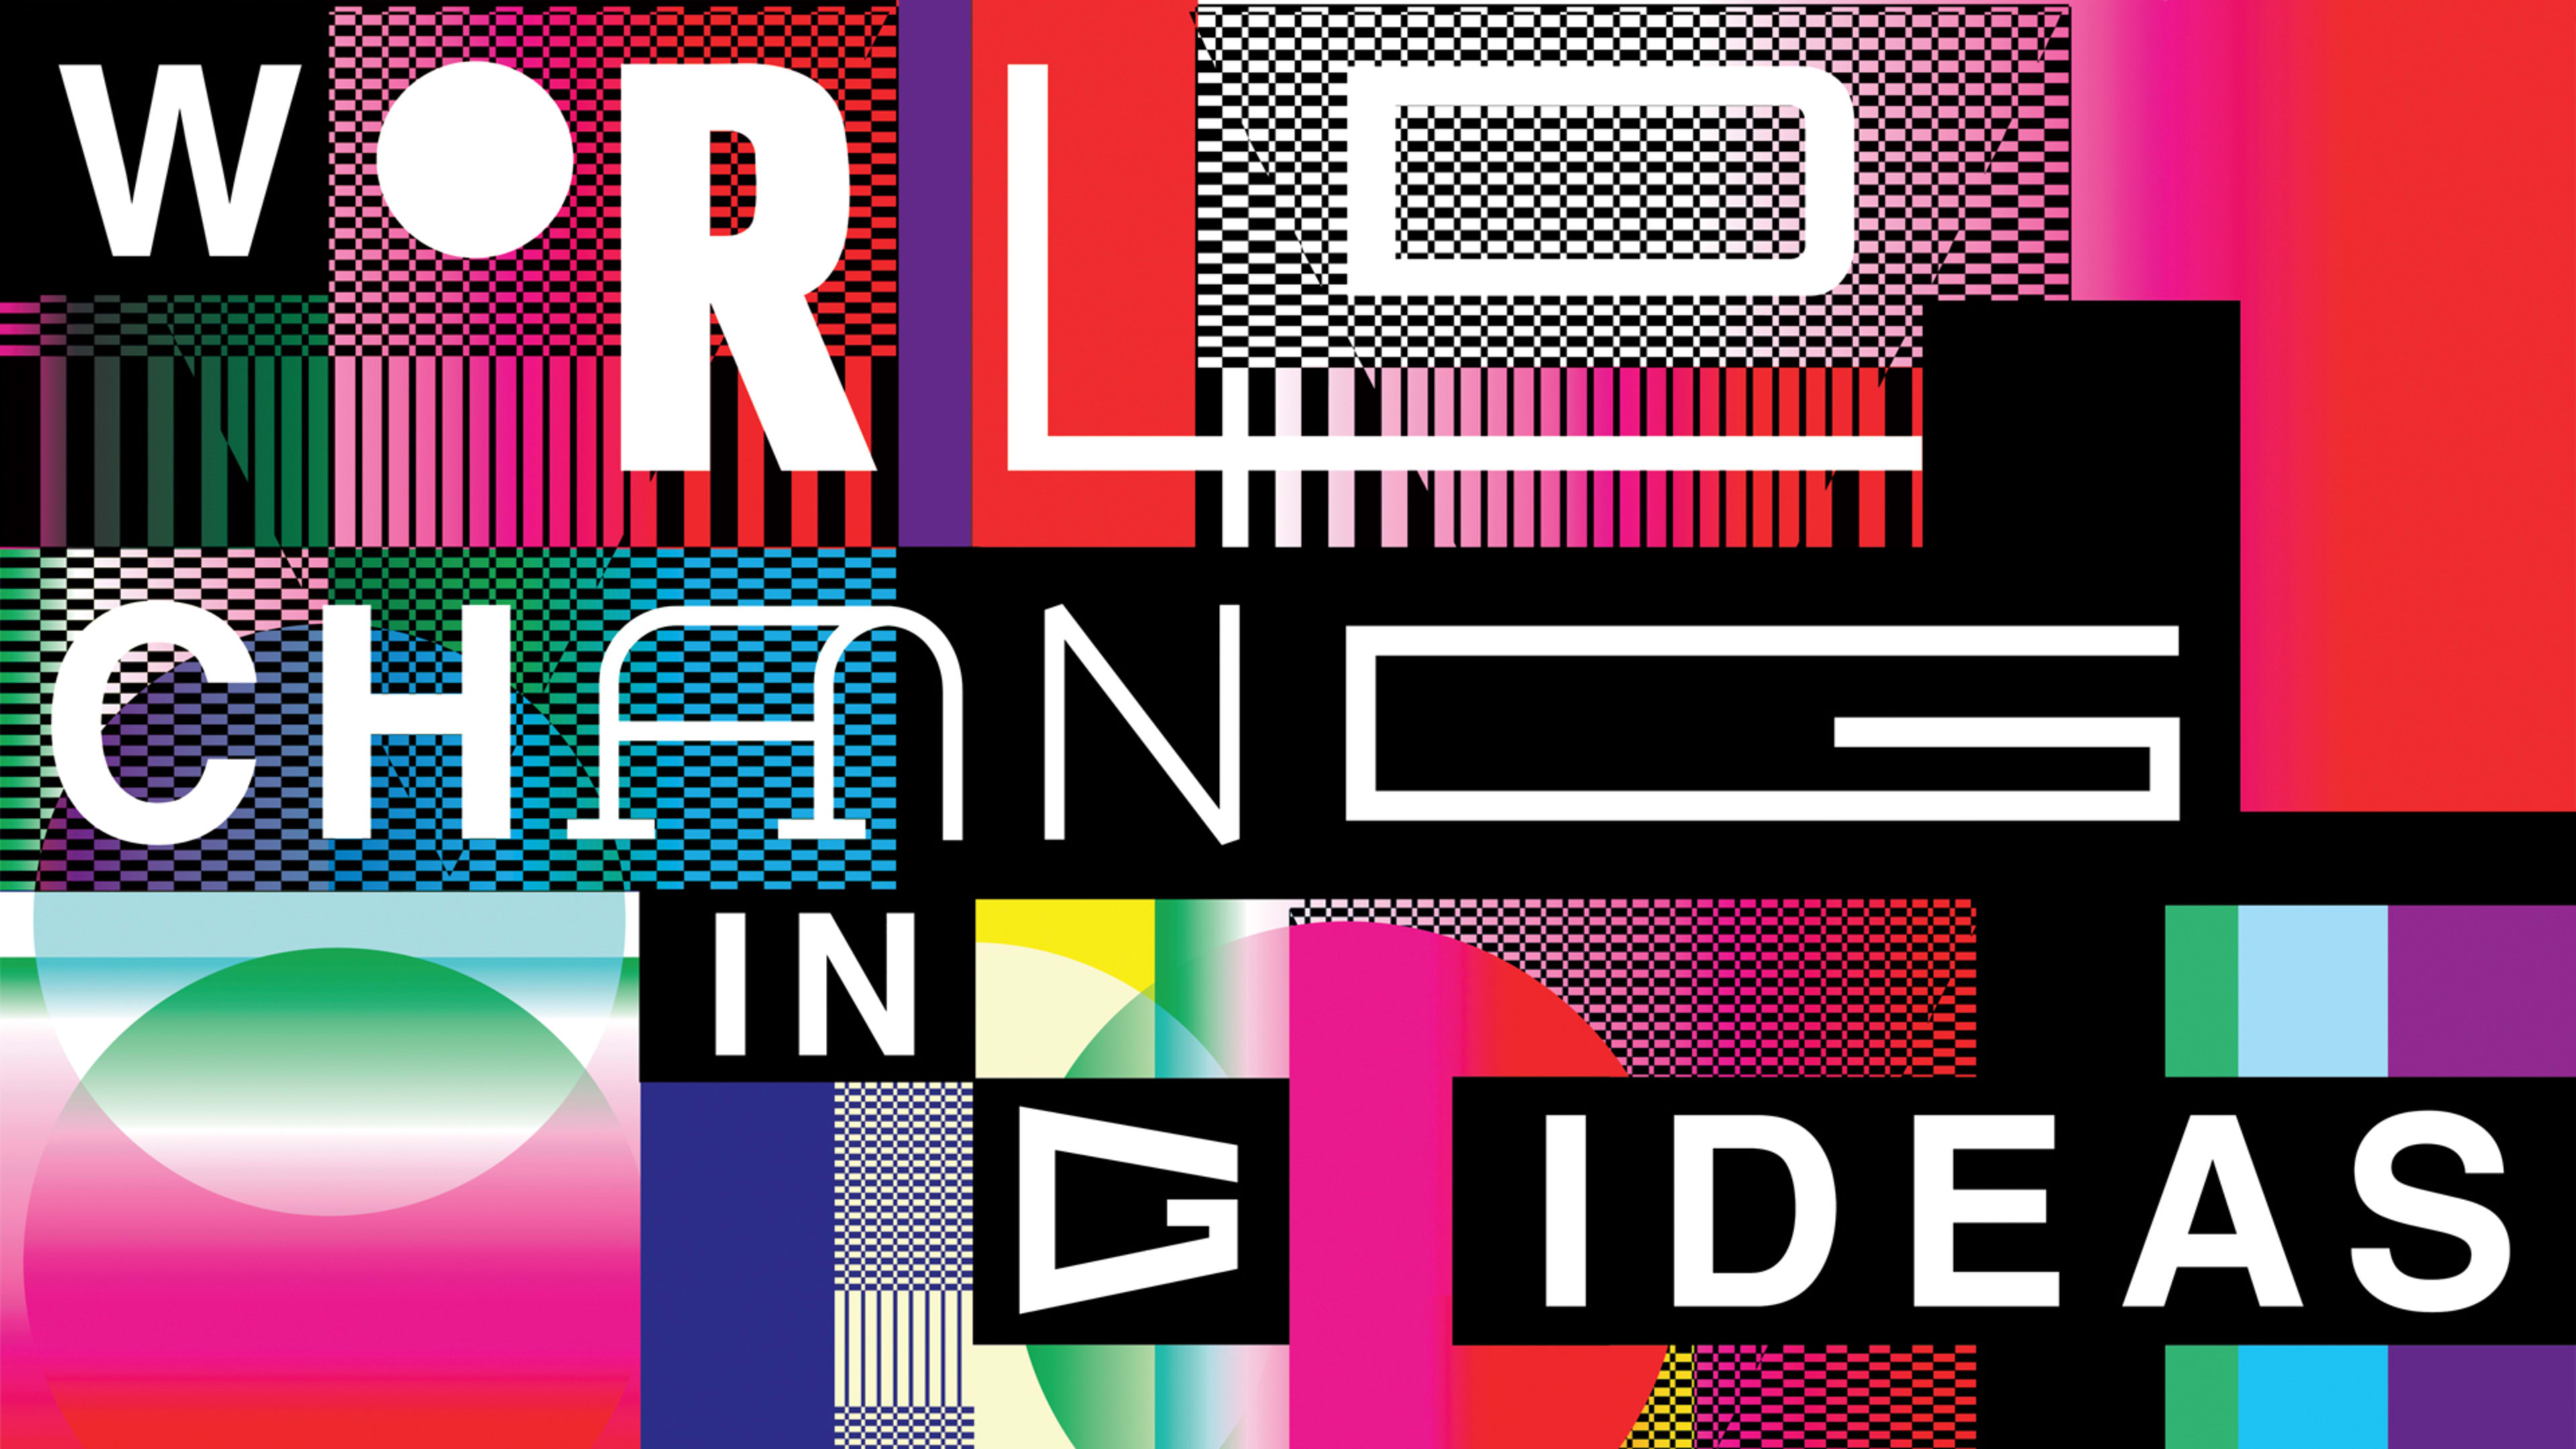 The 2018 World Changing Ideas Awards Finalists